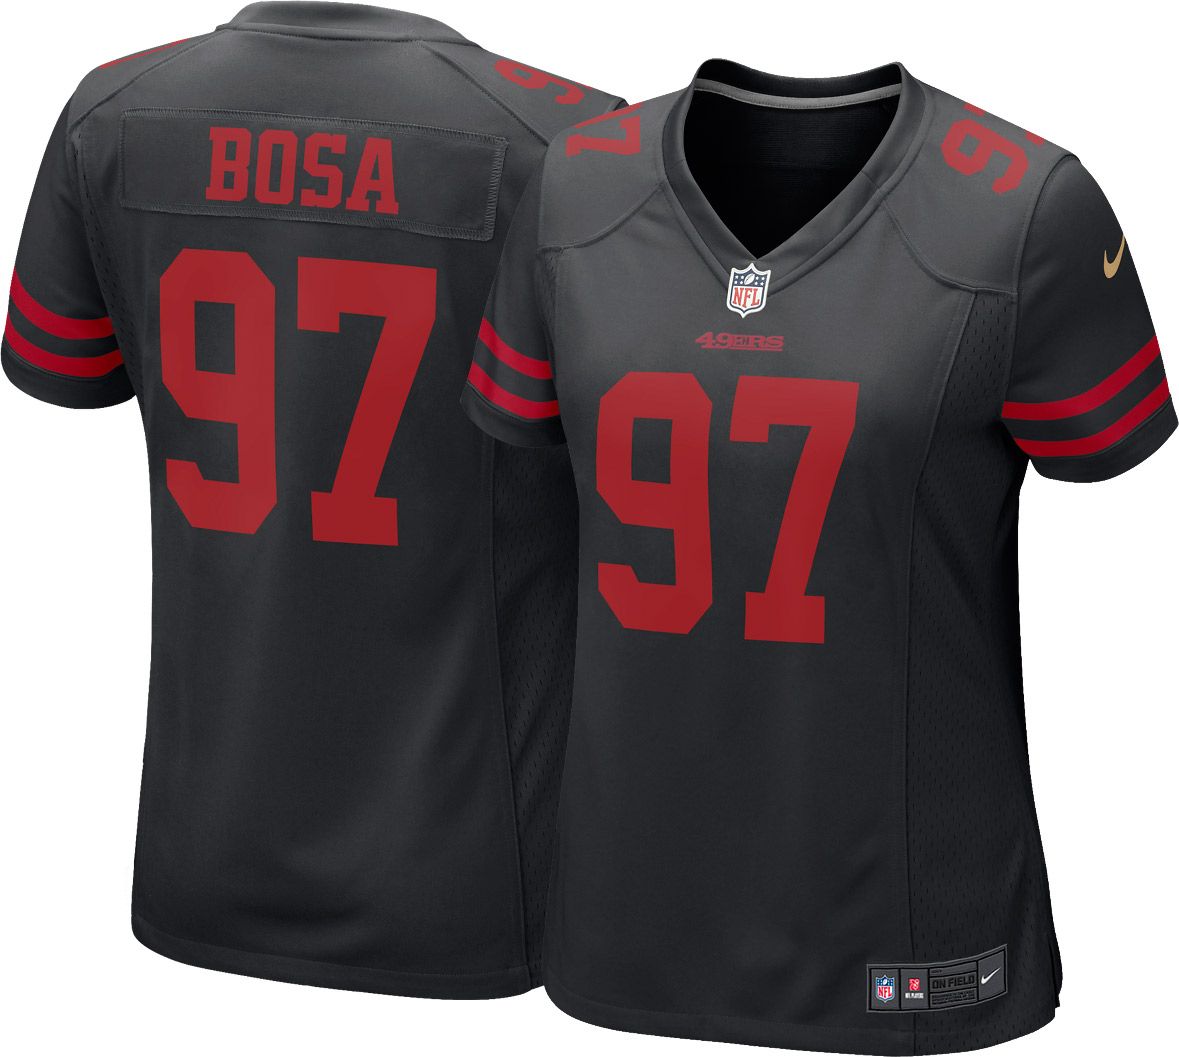 49ers jersey 97